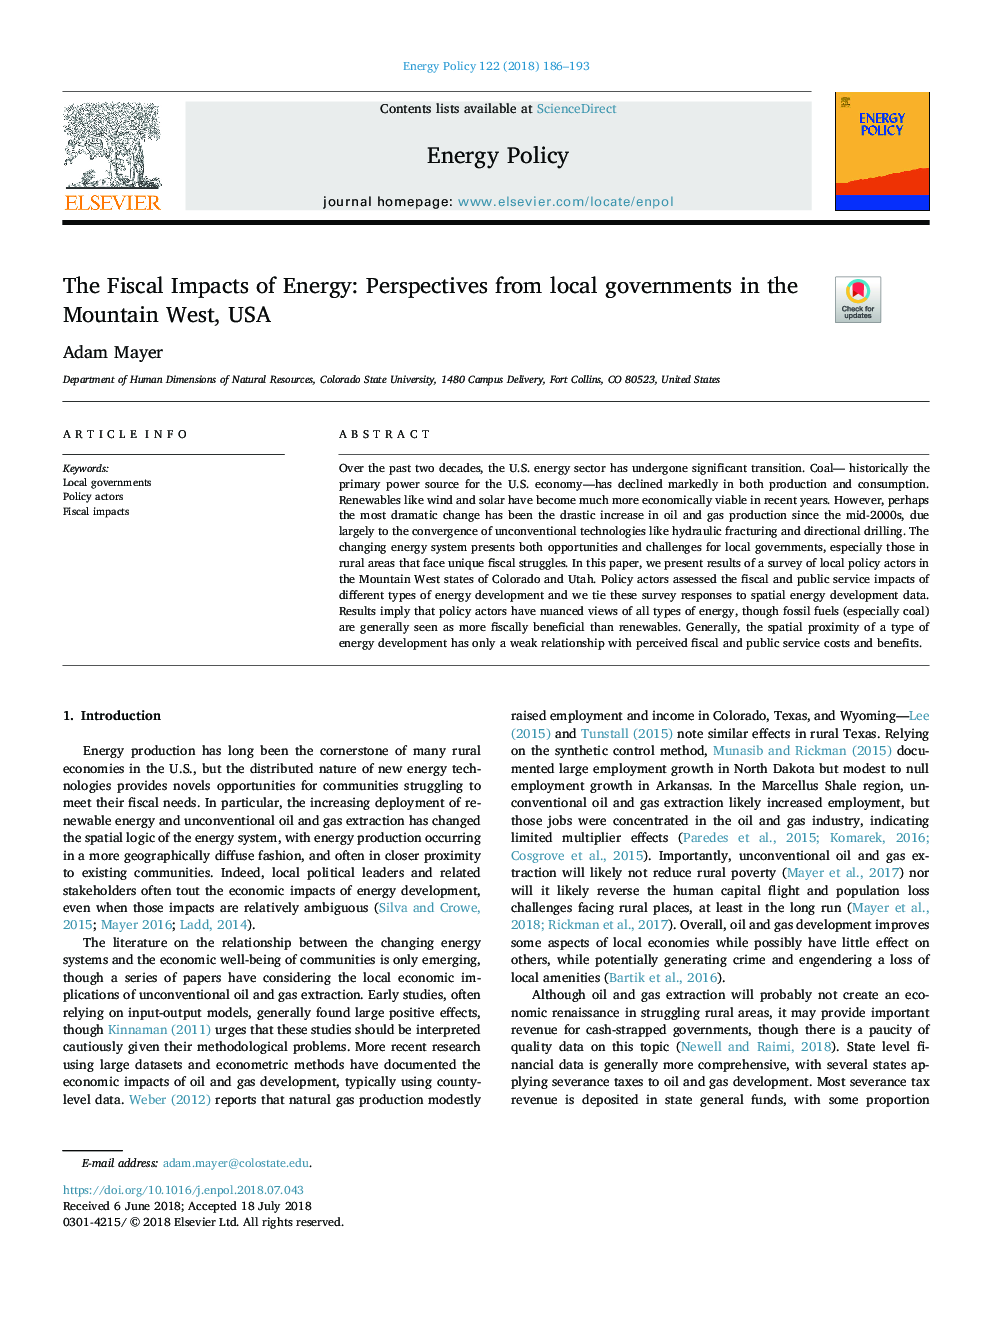 The Fiscal Impacts of Energy: Perspectives from local governments in the Mountain West, USA